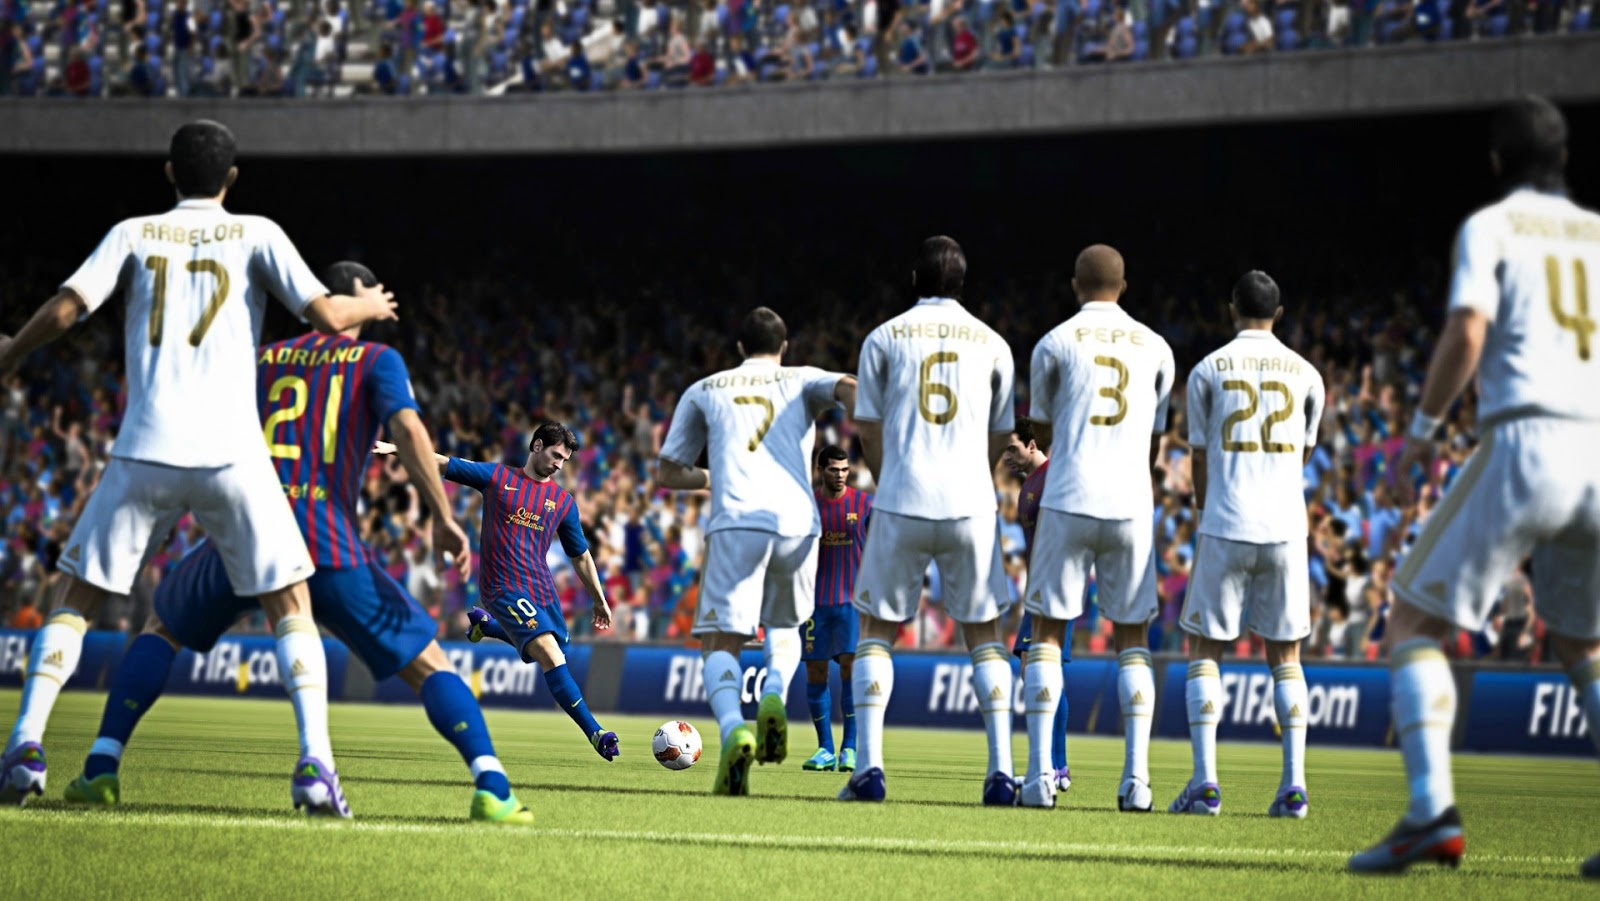 download pes 13 for pc